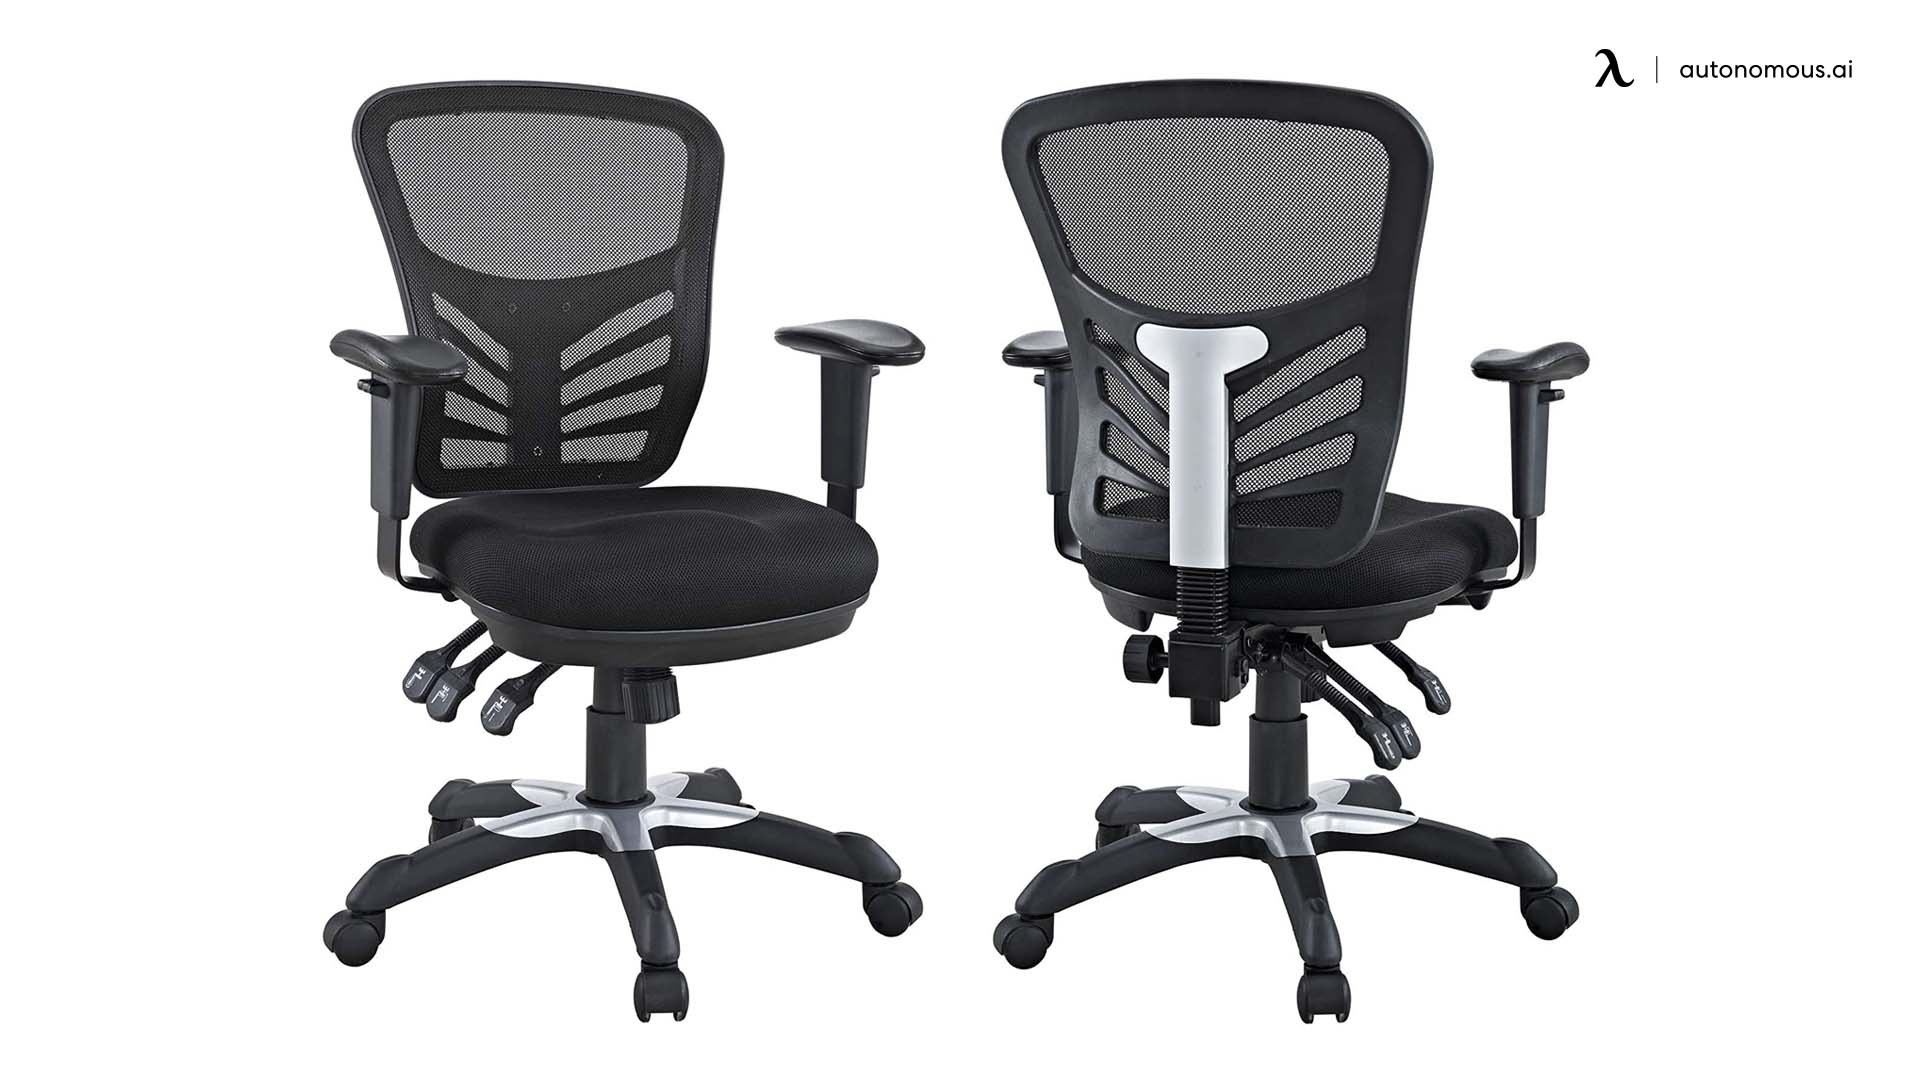 The 10 Top Picks For The Best Office Chair For Long Hours In 2021